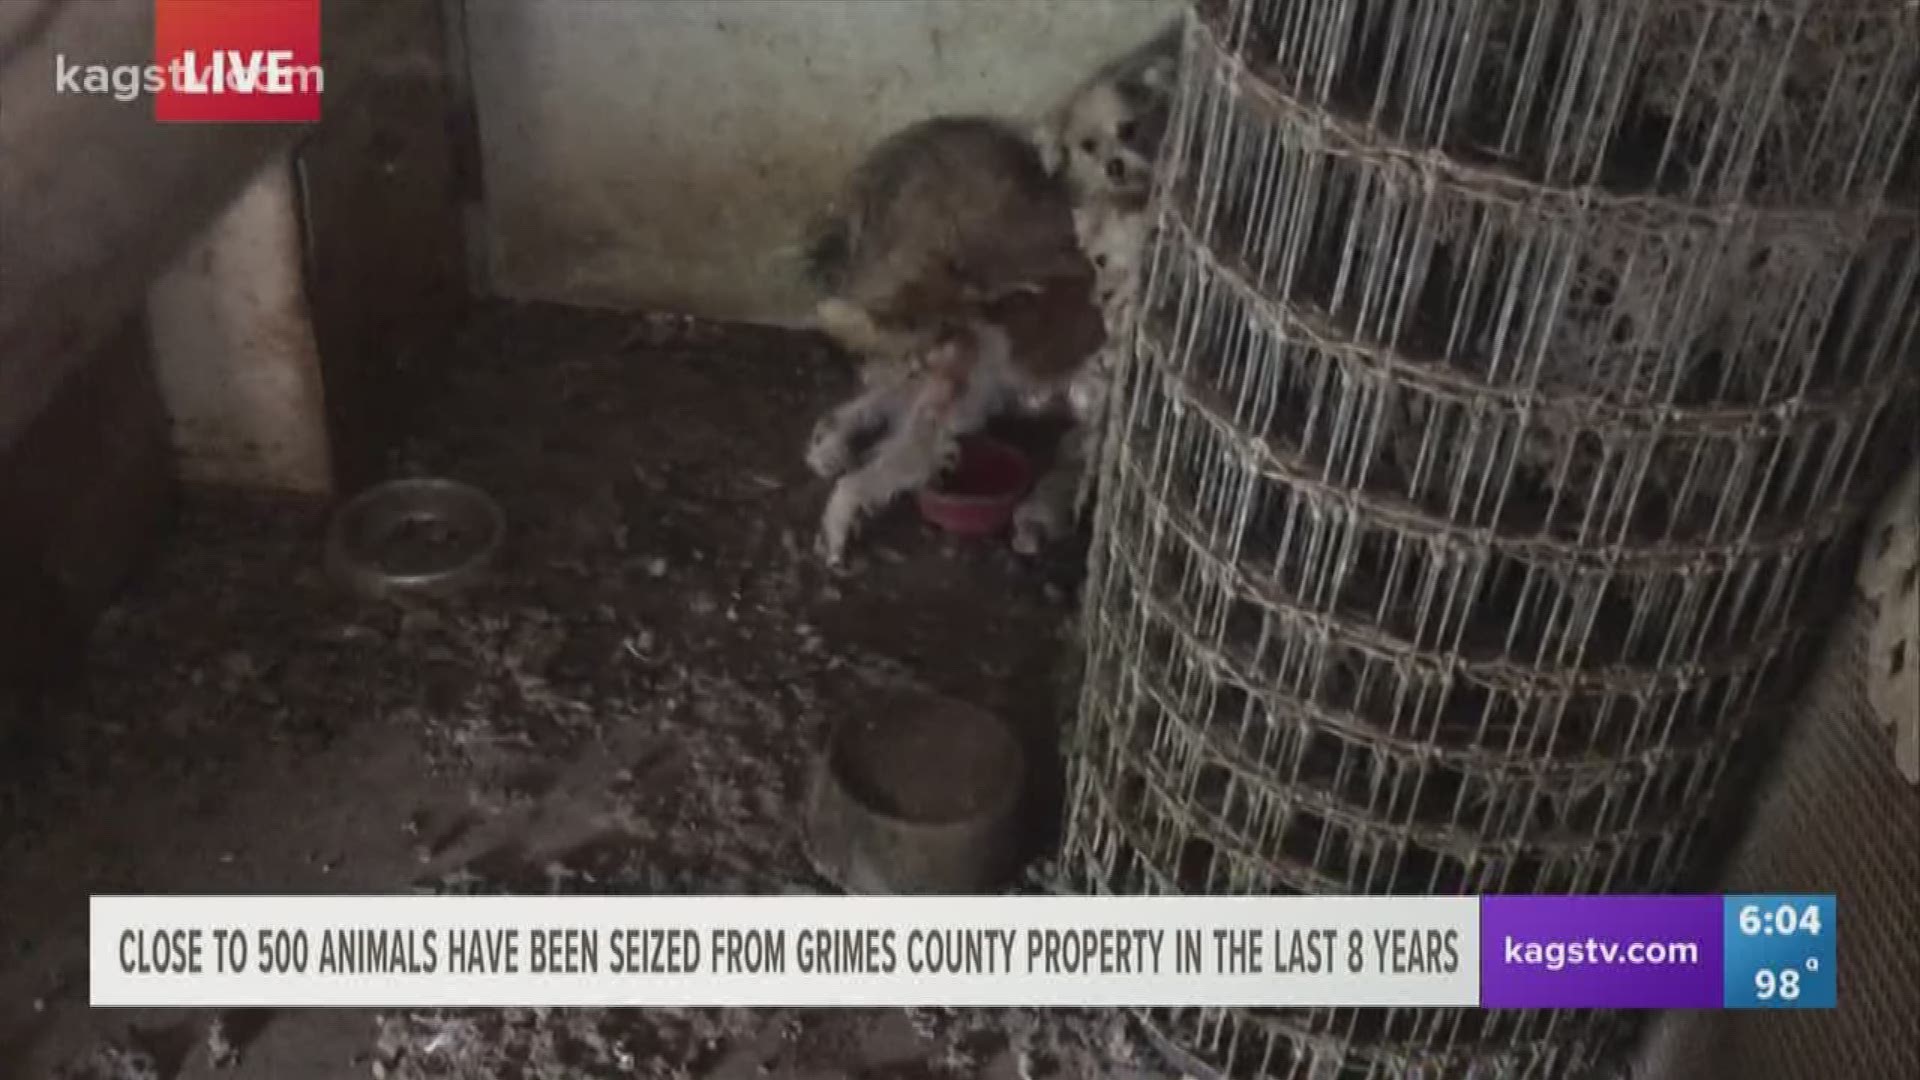 Authorities have investigated and rescued hundreds of animals from the same property